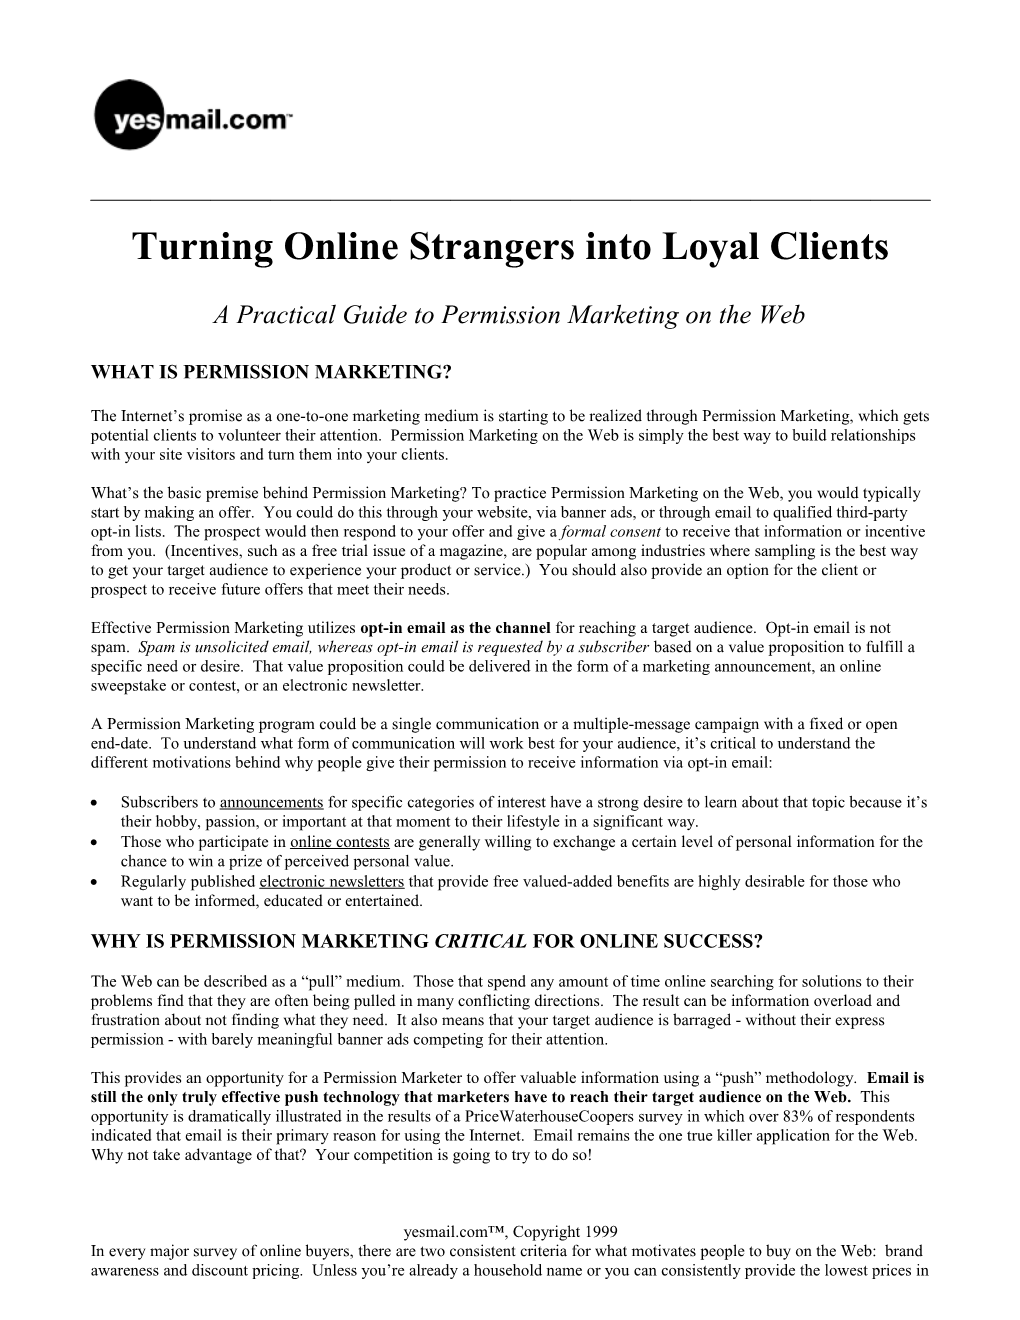 Turning Online Strangers Into Loyal Clients